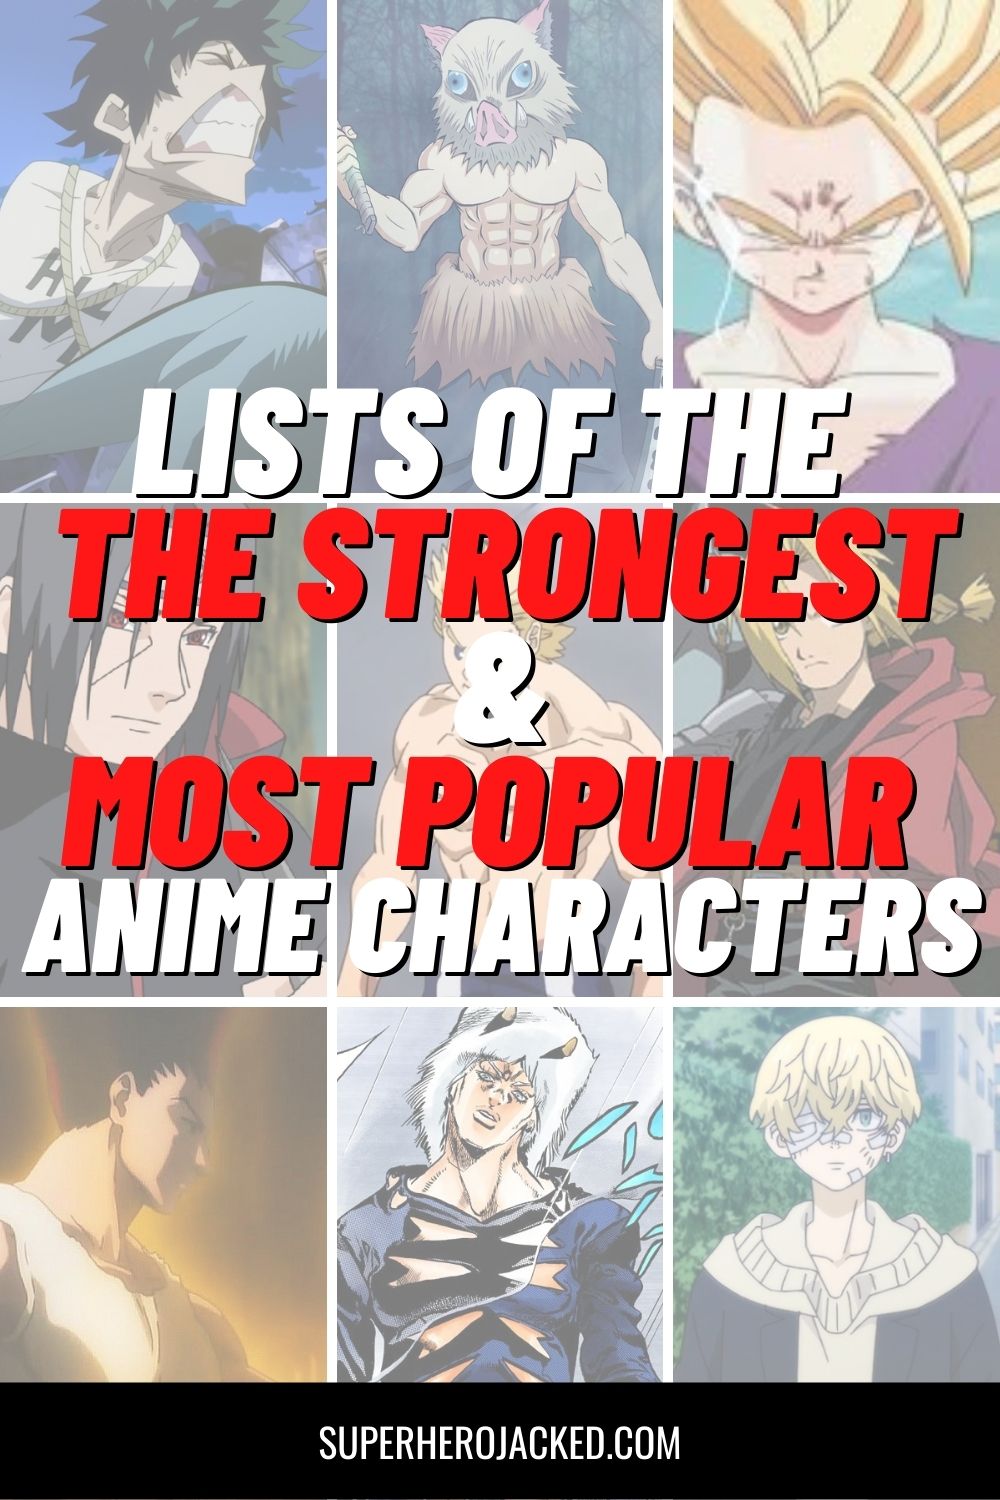 THE STRONGEST & MOST POPULAR anime characters